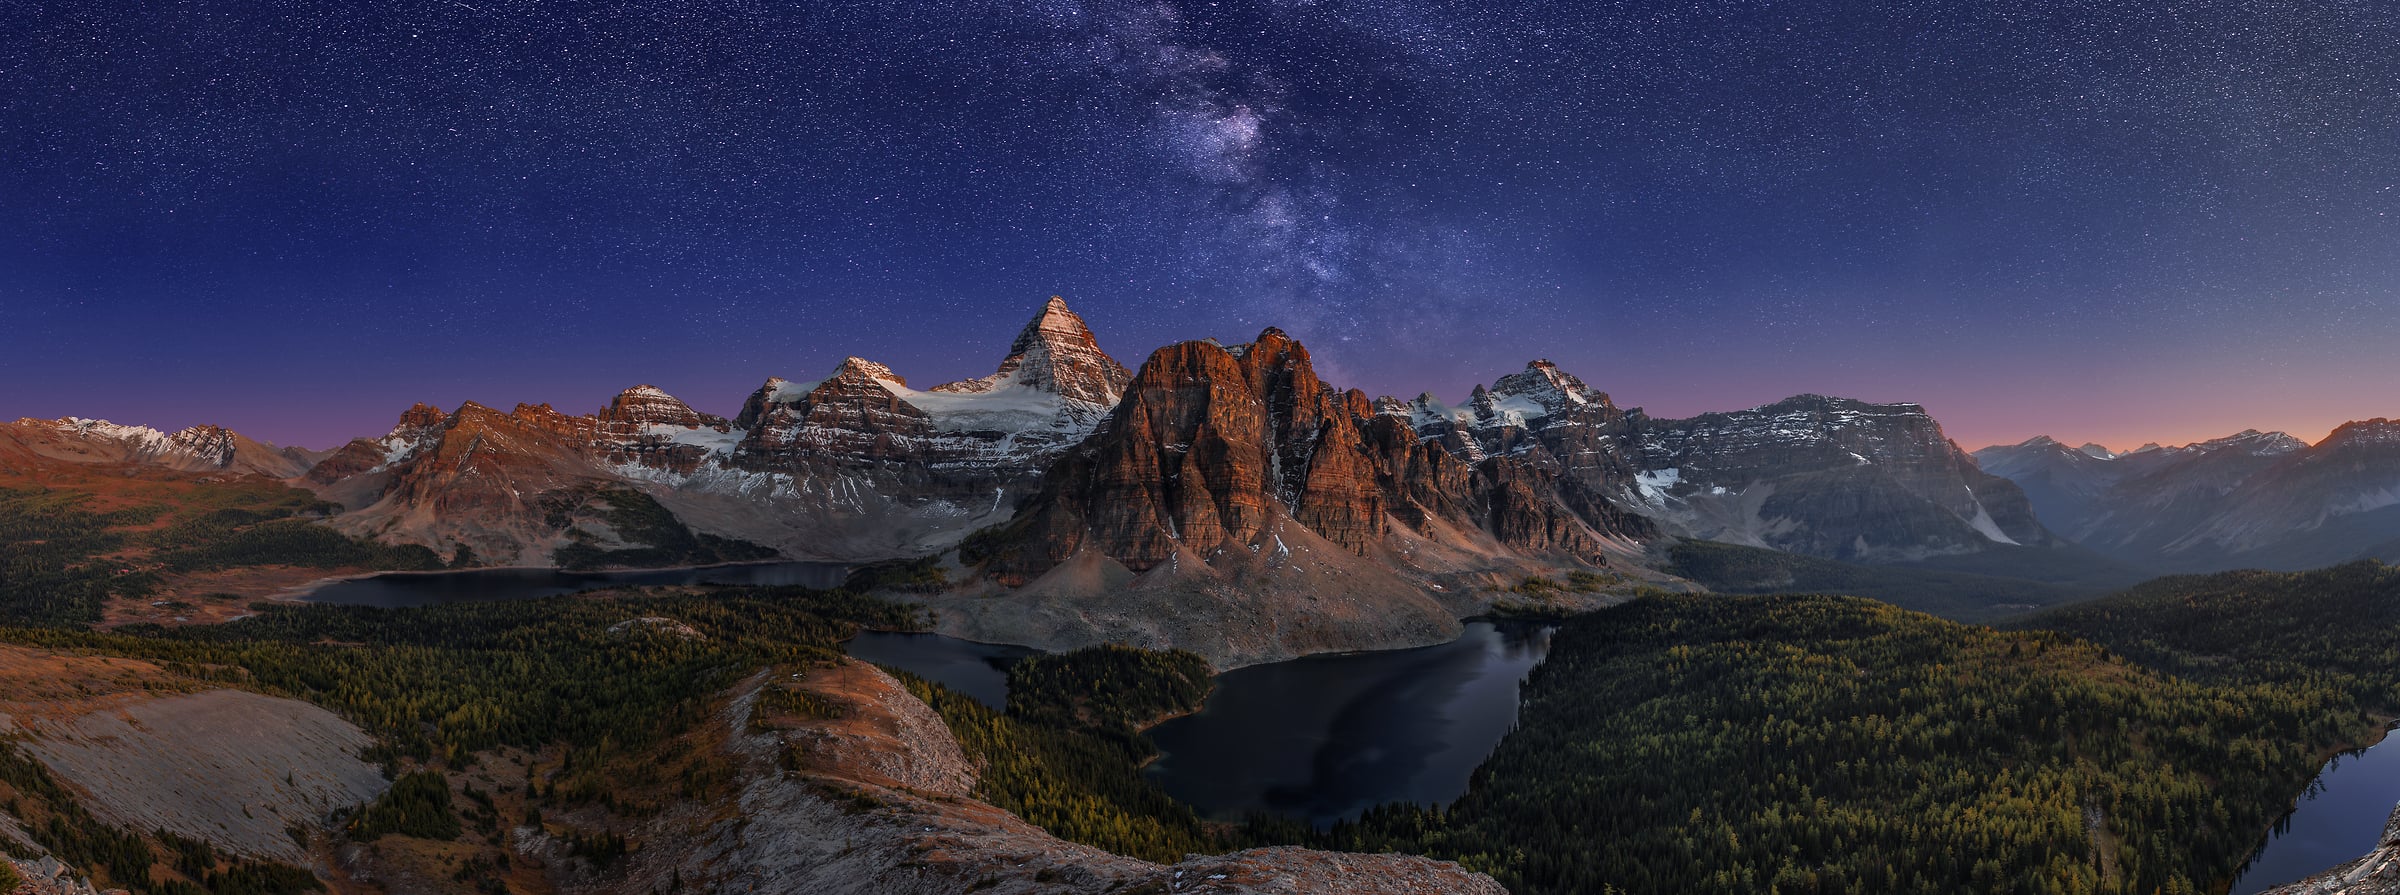 923 megapixels! A very high resolution, large-format VAST photo print of mountains, lakes, the milky way, stars, and Mount Assiniboine; fine art landscape photo created by Chris Collacott in Assiniboine Provinical Park, British Columbia, Canada